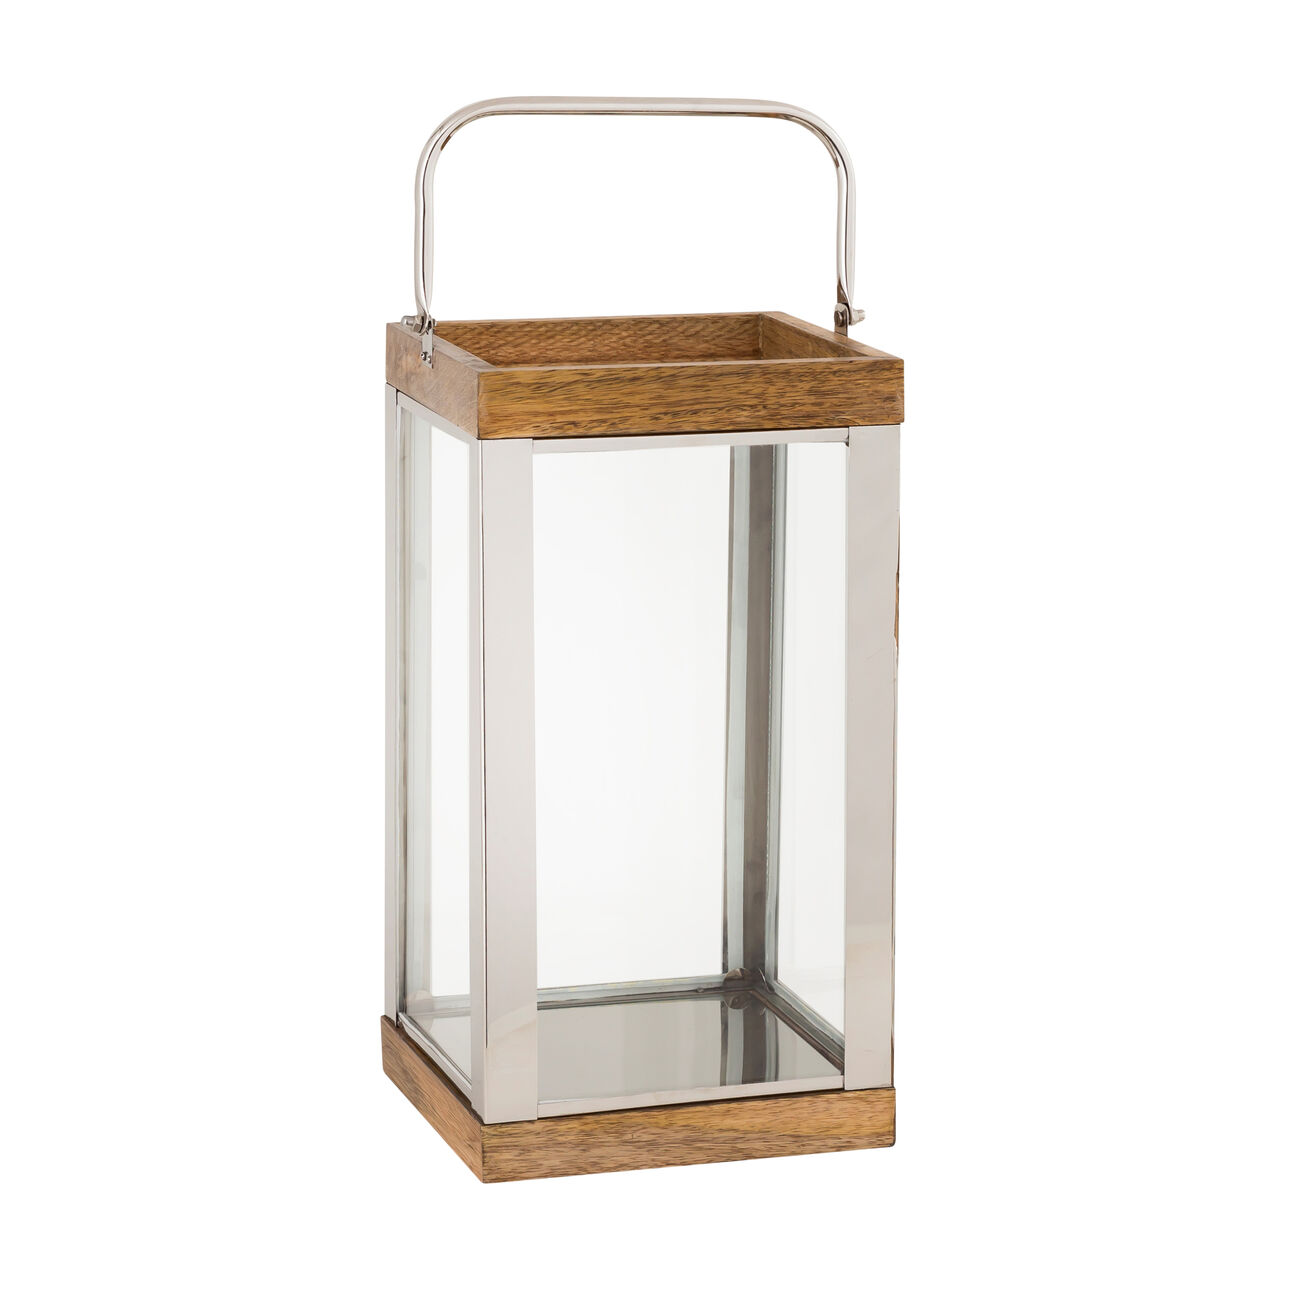 Wood and Metal Lantern with Glass Panel Inserts, Large,Brown and Clear